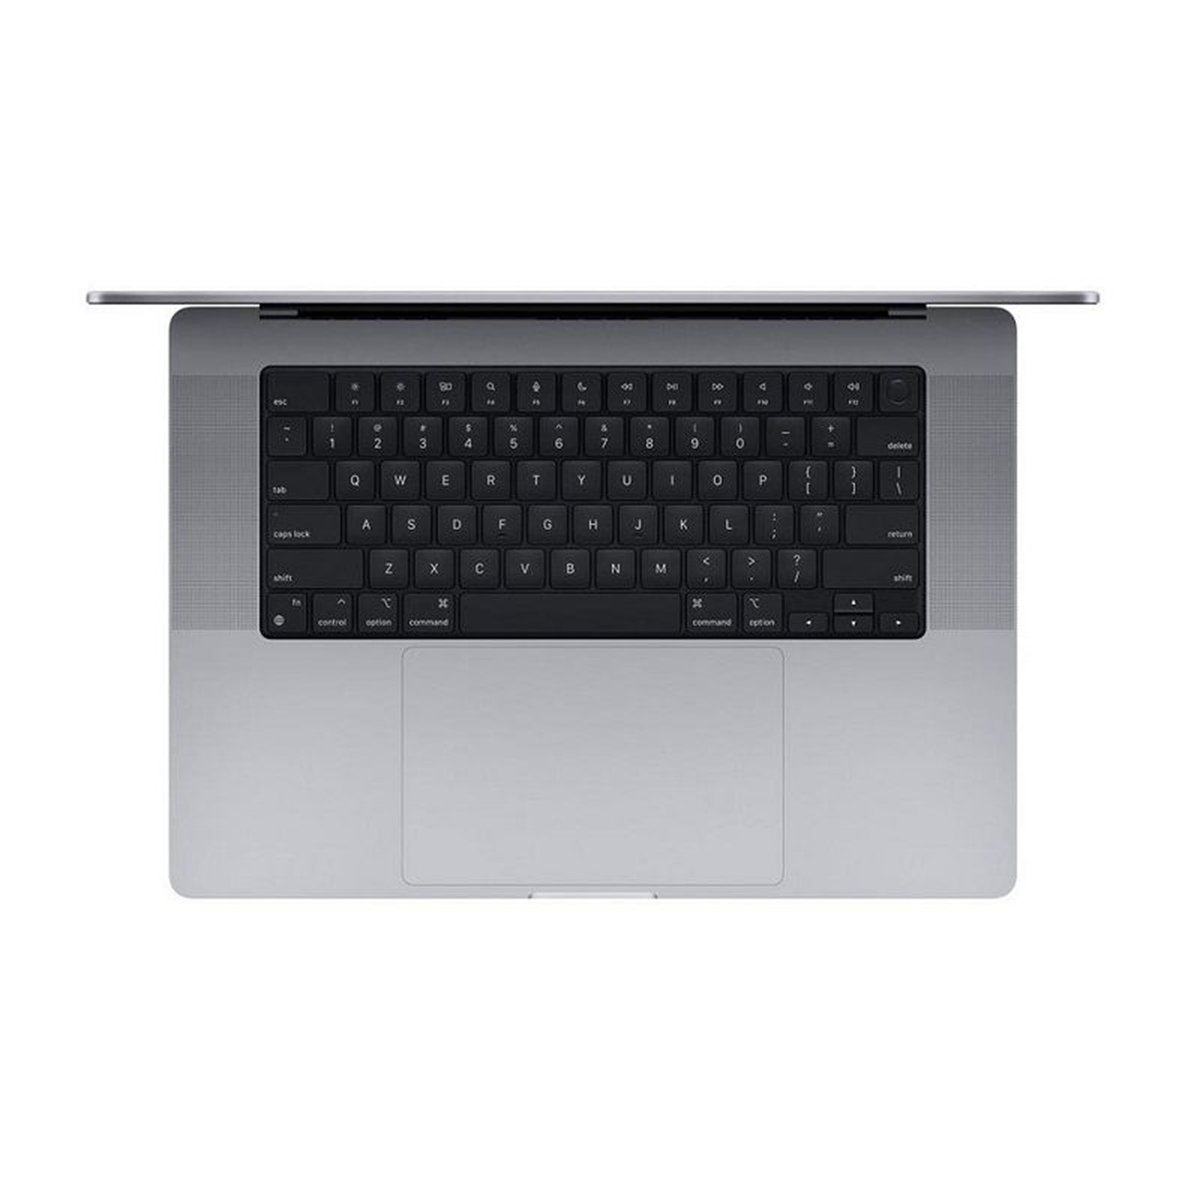 Apple 14-inch MacBook Pro: Apple M1 Pro chip with 8‑core CPU and 14‑core GPU, 512GB SSD - Space Grey English Keyboard